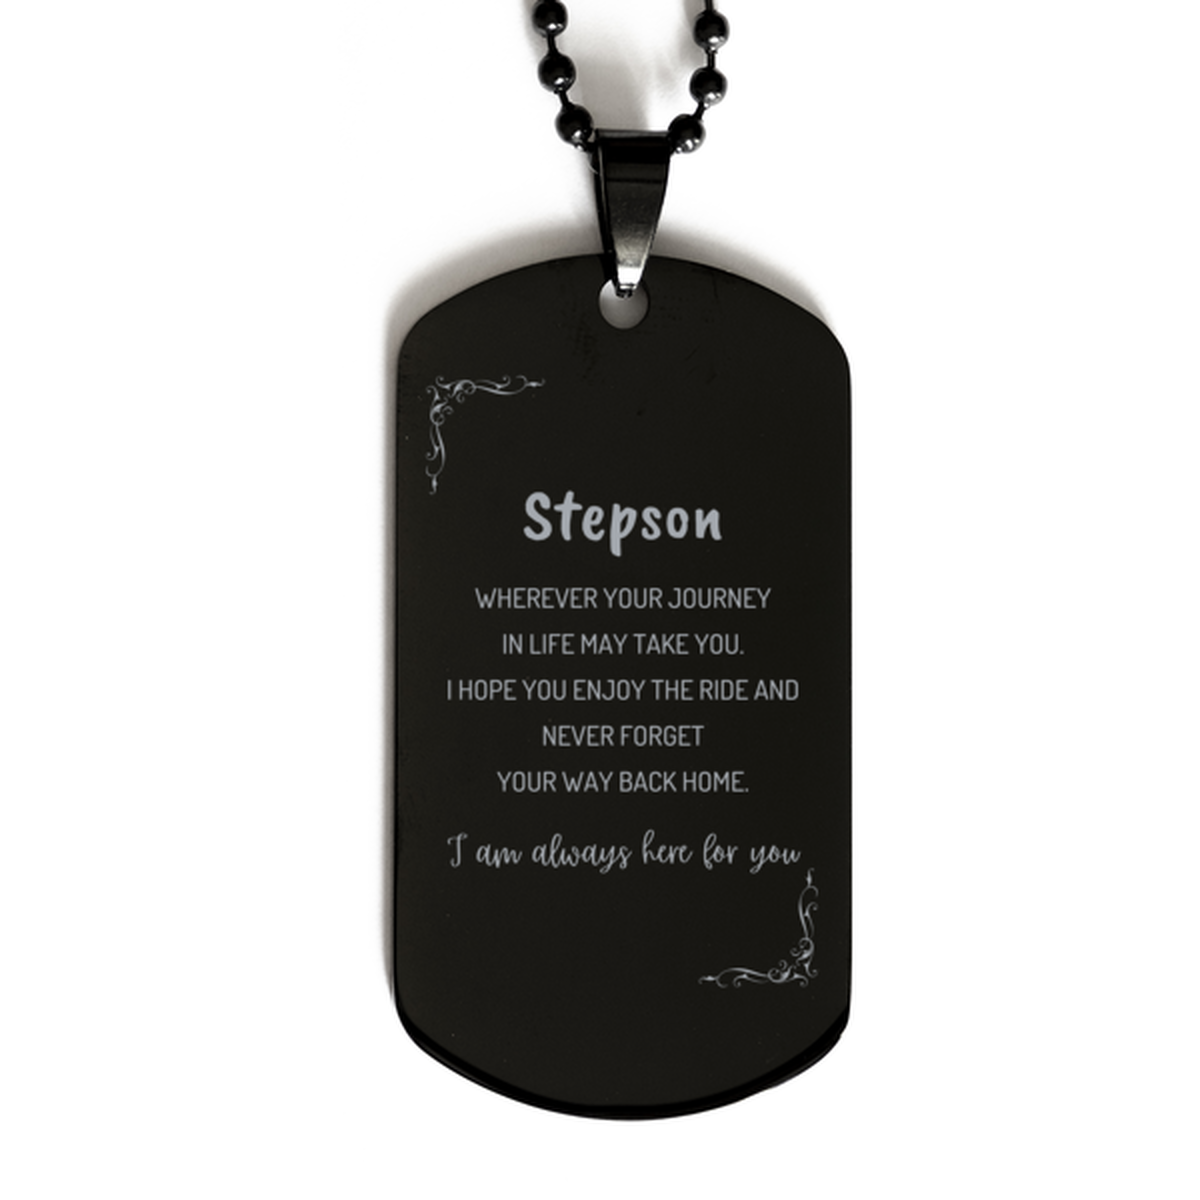 Stepson wherever your journey in life may take you, I am always here for you Stepson Black Dog Tag, Awesome Christmas Gifts For Stepson, Stepson Birthday Gifts for Men Women Family Loved One